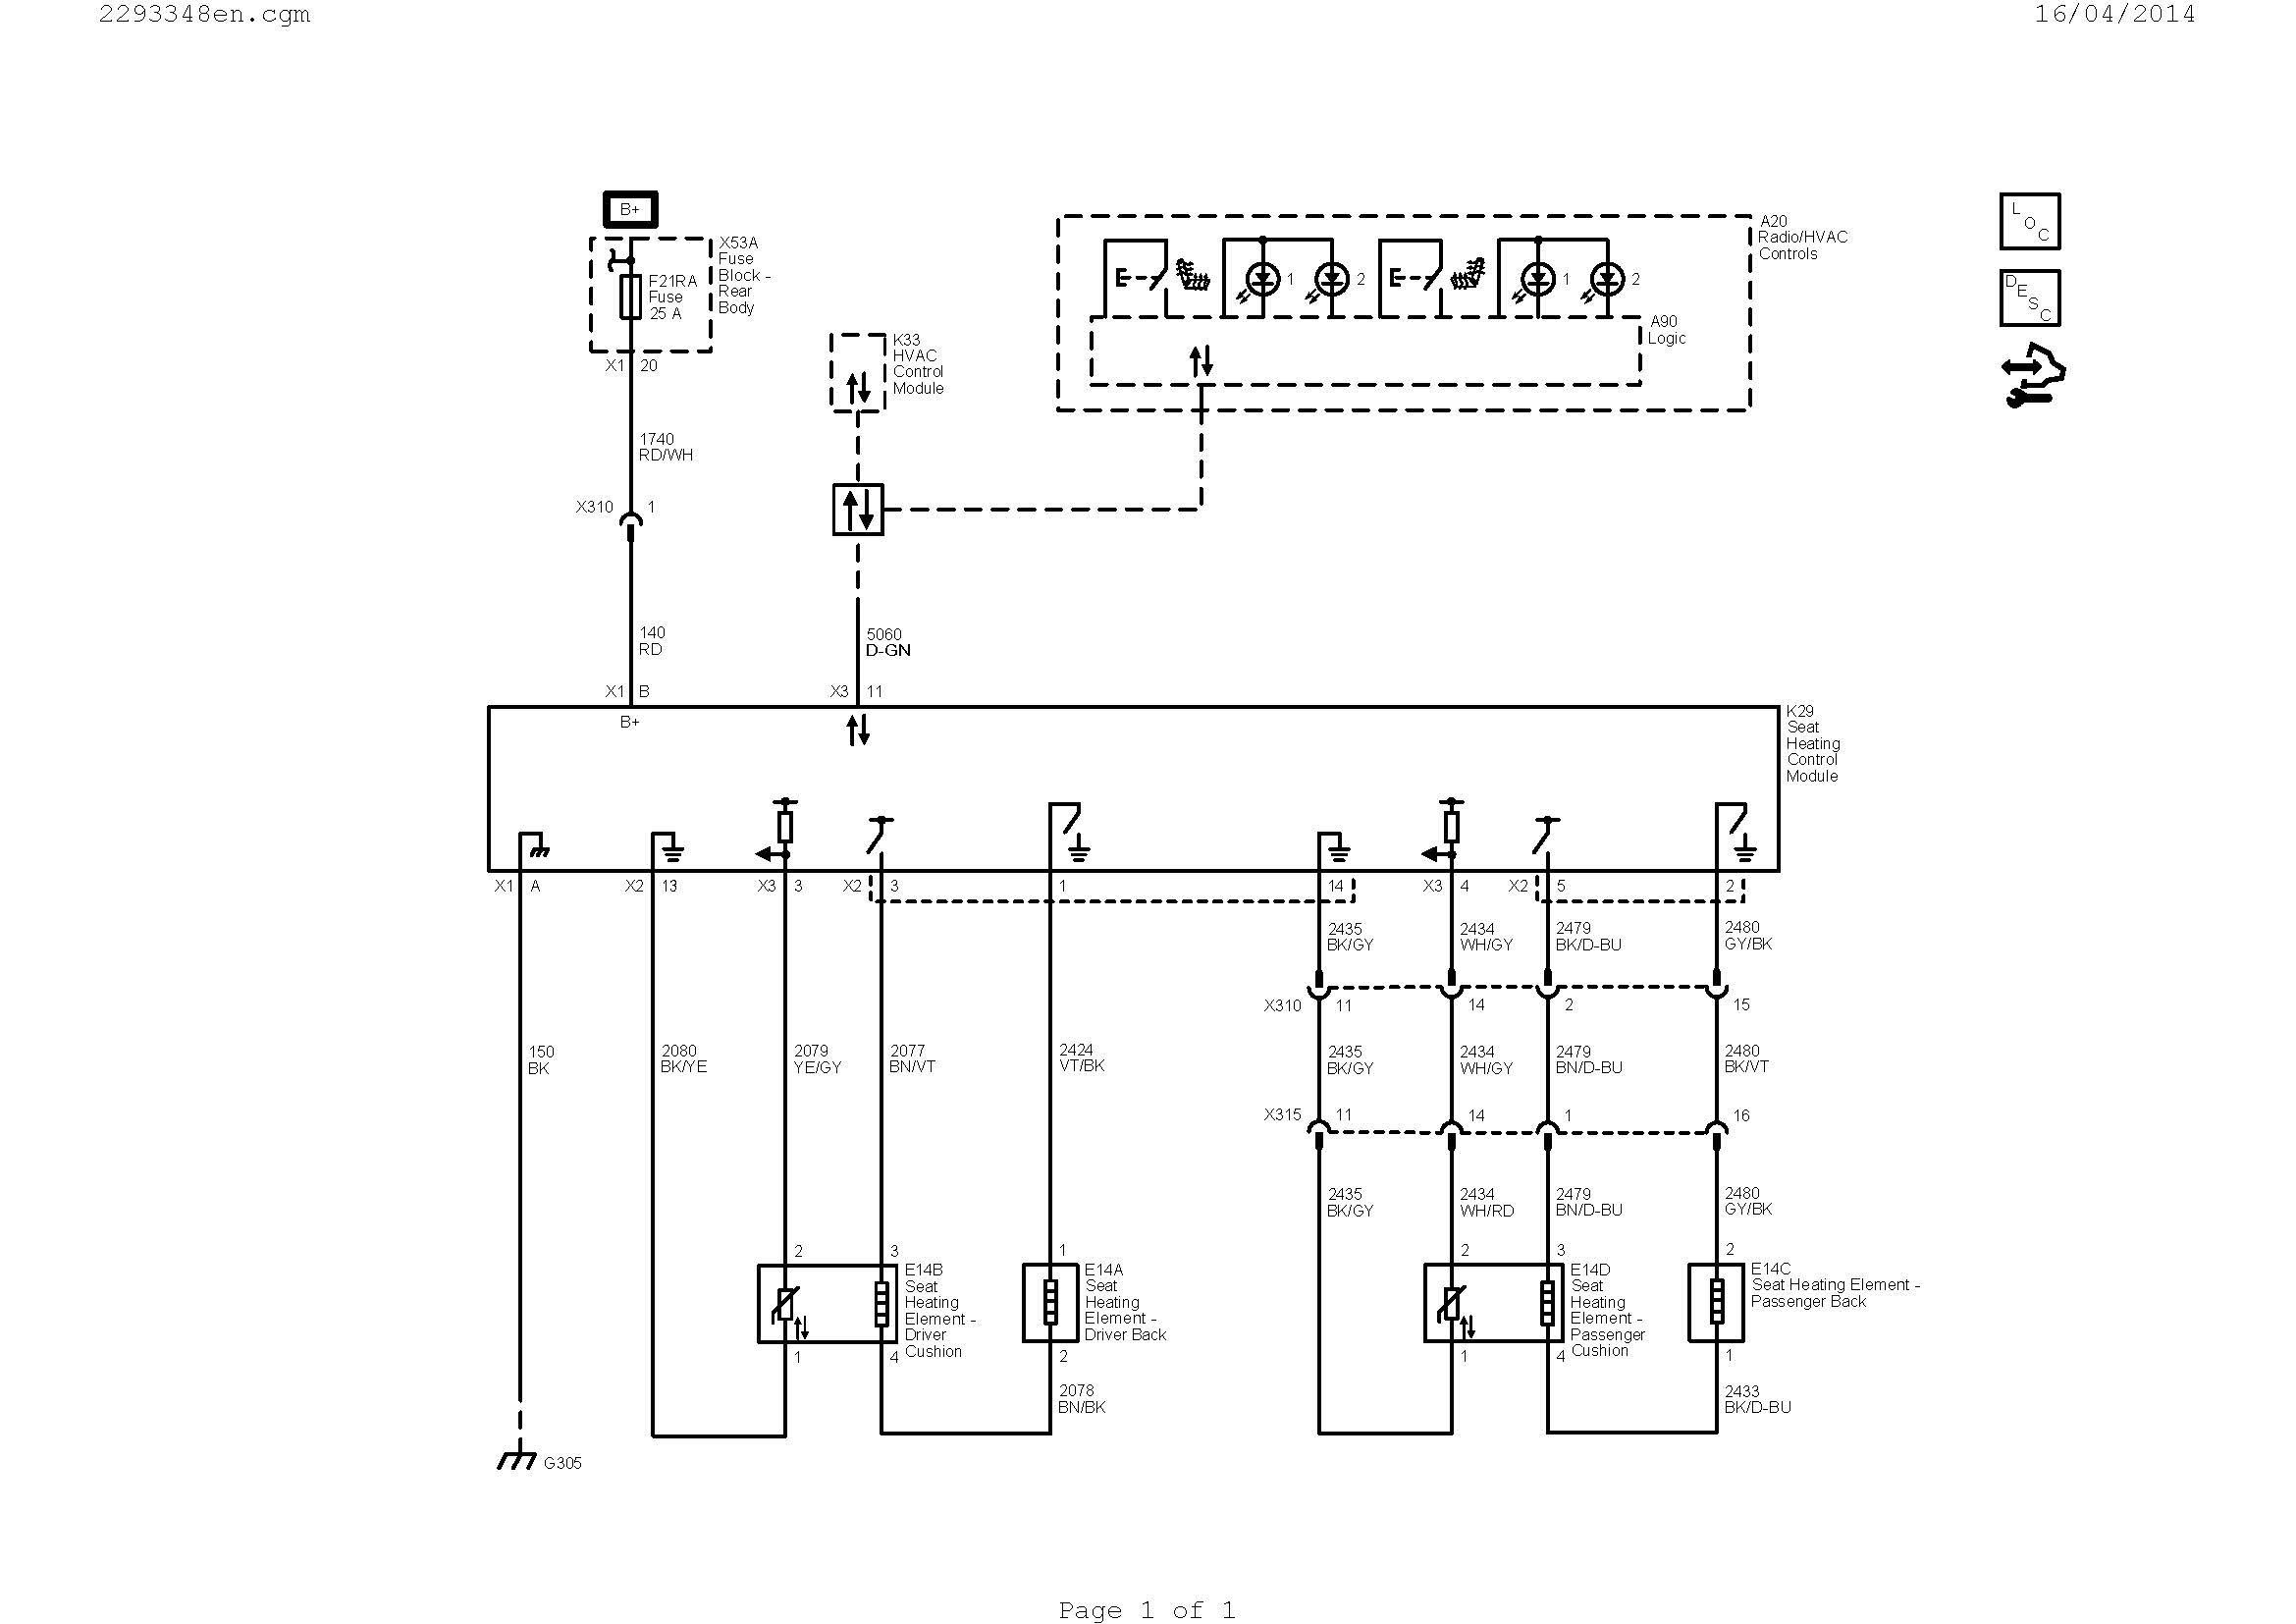 Wiring Diagram for A Relay Switch Save Wiring Diagram Ac Valid Hvac Led Wiring Diagram